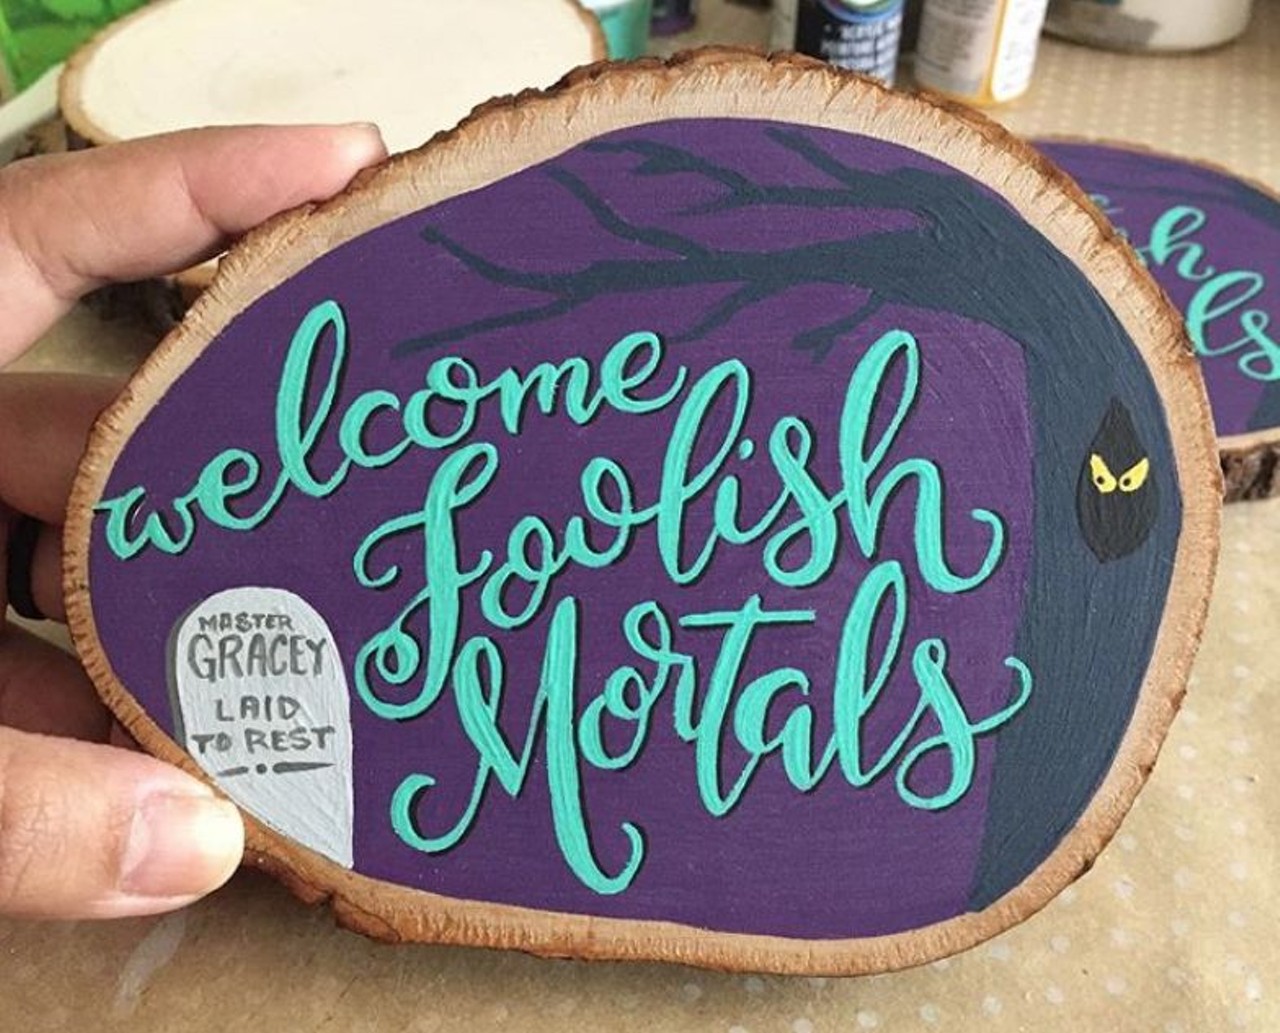 Hazel Weagraff Designs  
These hand-painted signs are sure to add some color to your home with their positive messages, Disney quotes and more.
Photo via hazelweadesigns / Instagram